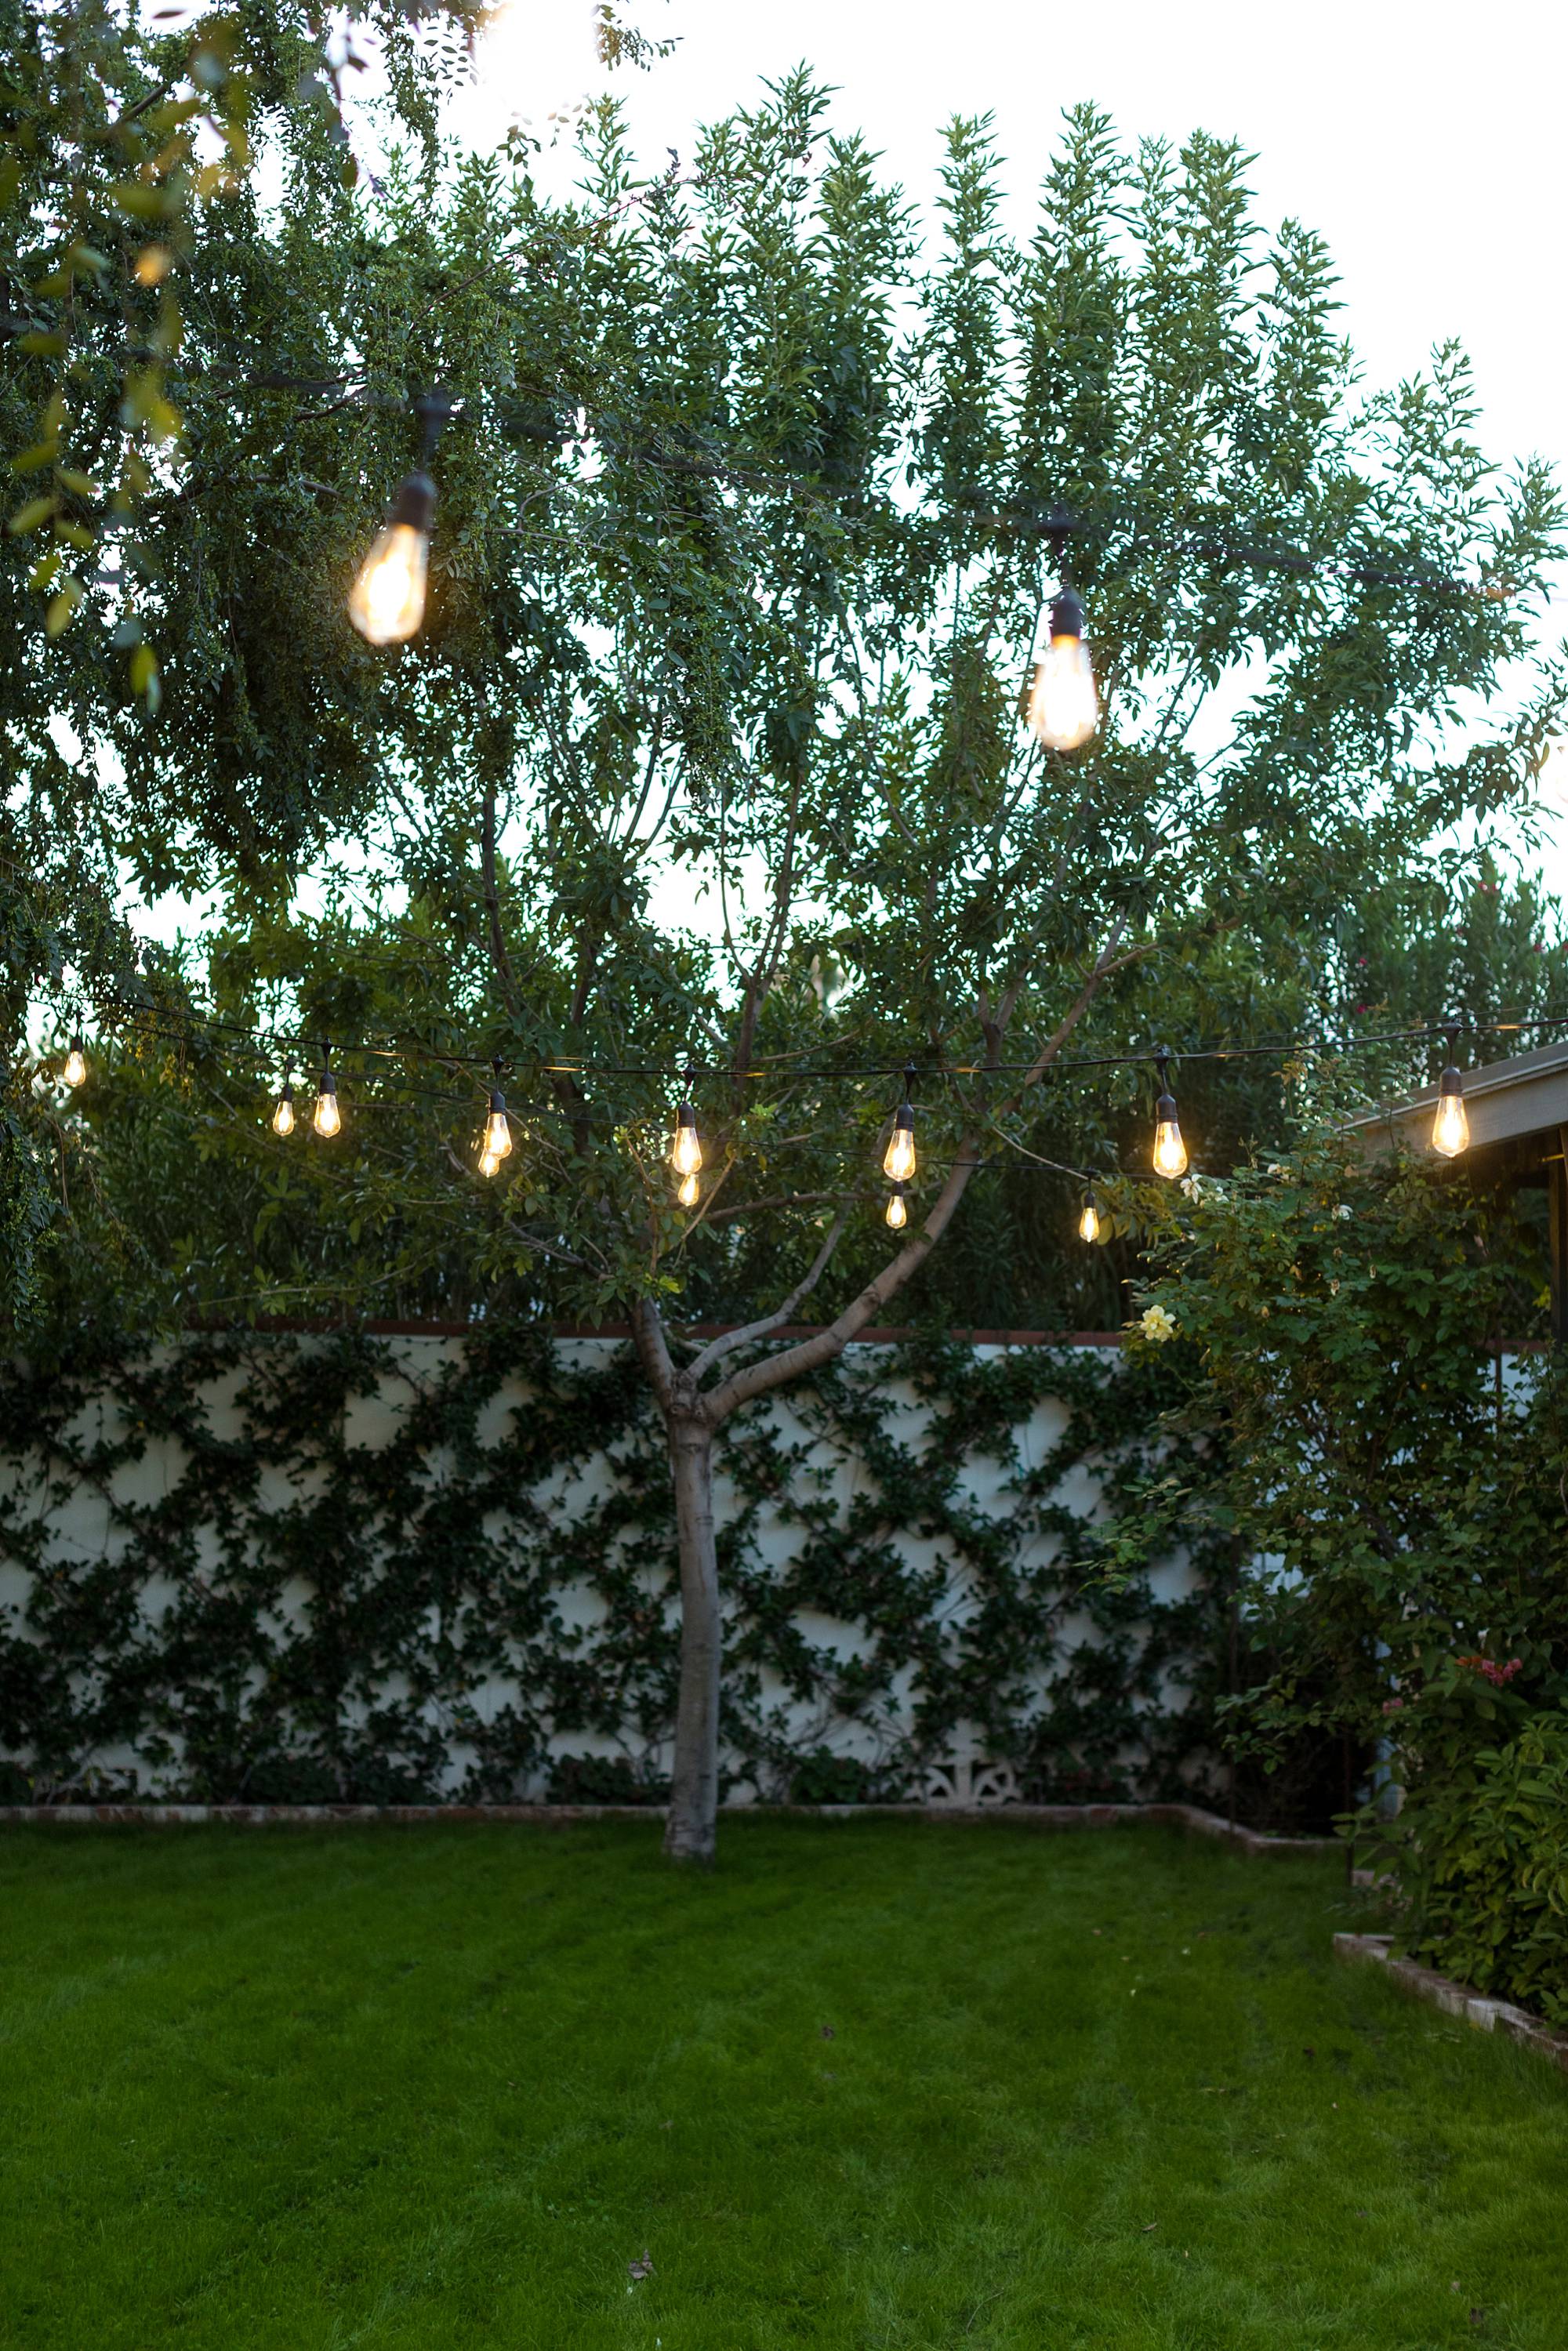 how to hang cafe string lights on cable wire in backyard - easy DIY and all the materials you need